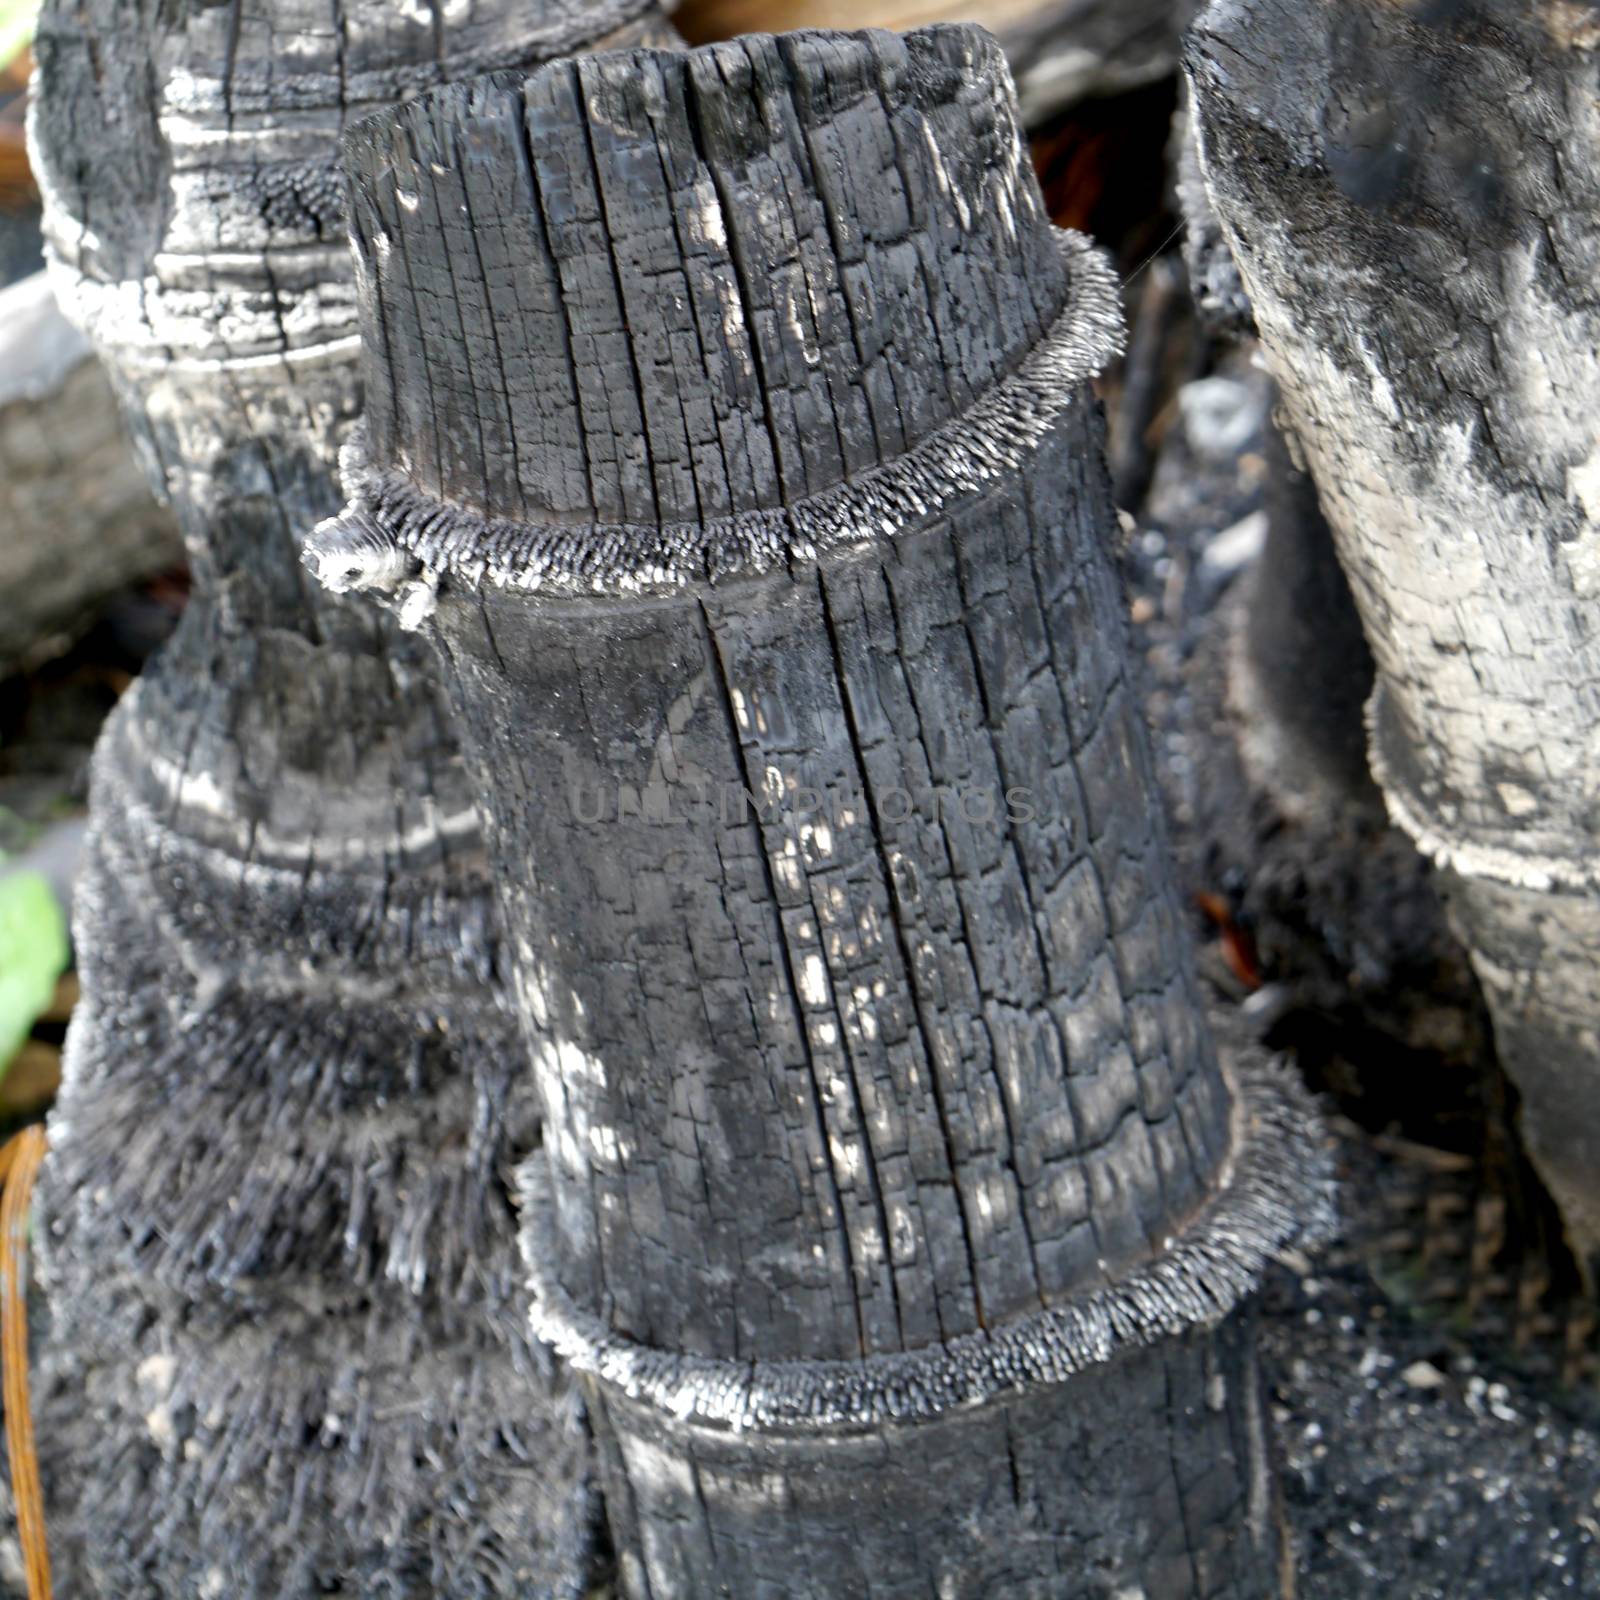 Bamboo charcoal for making inks.